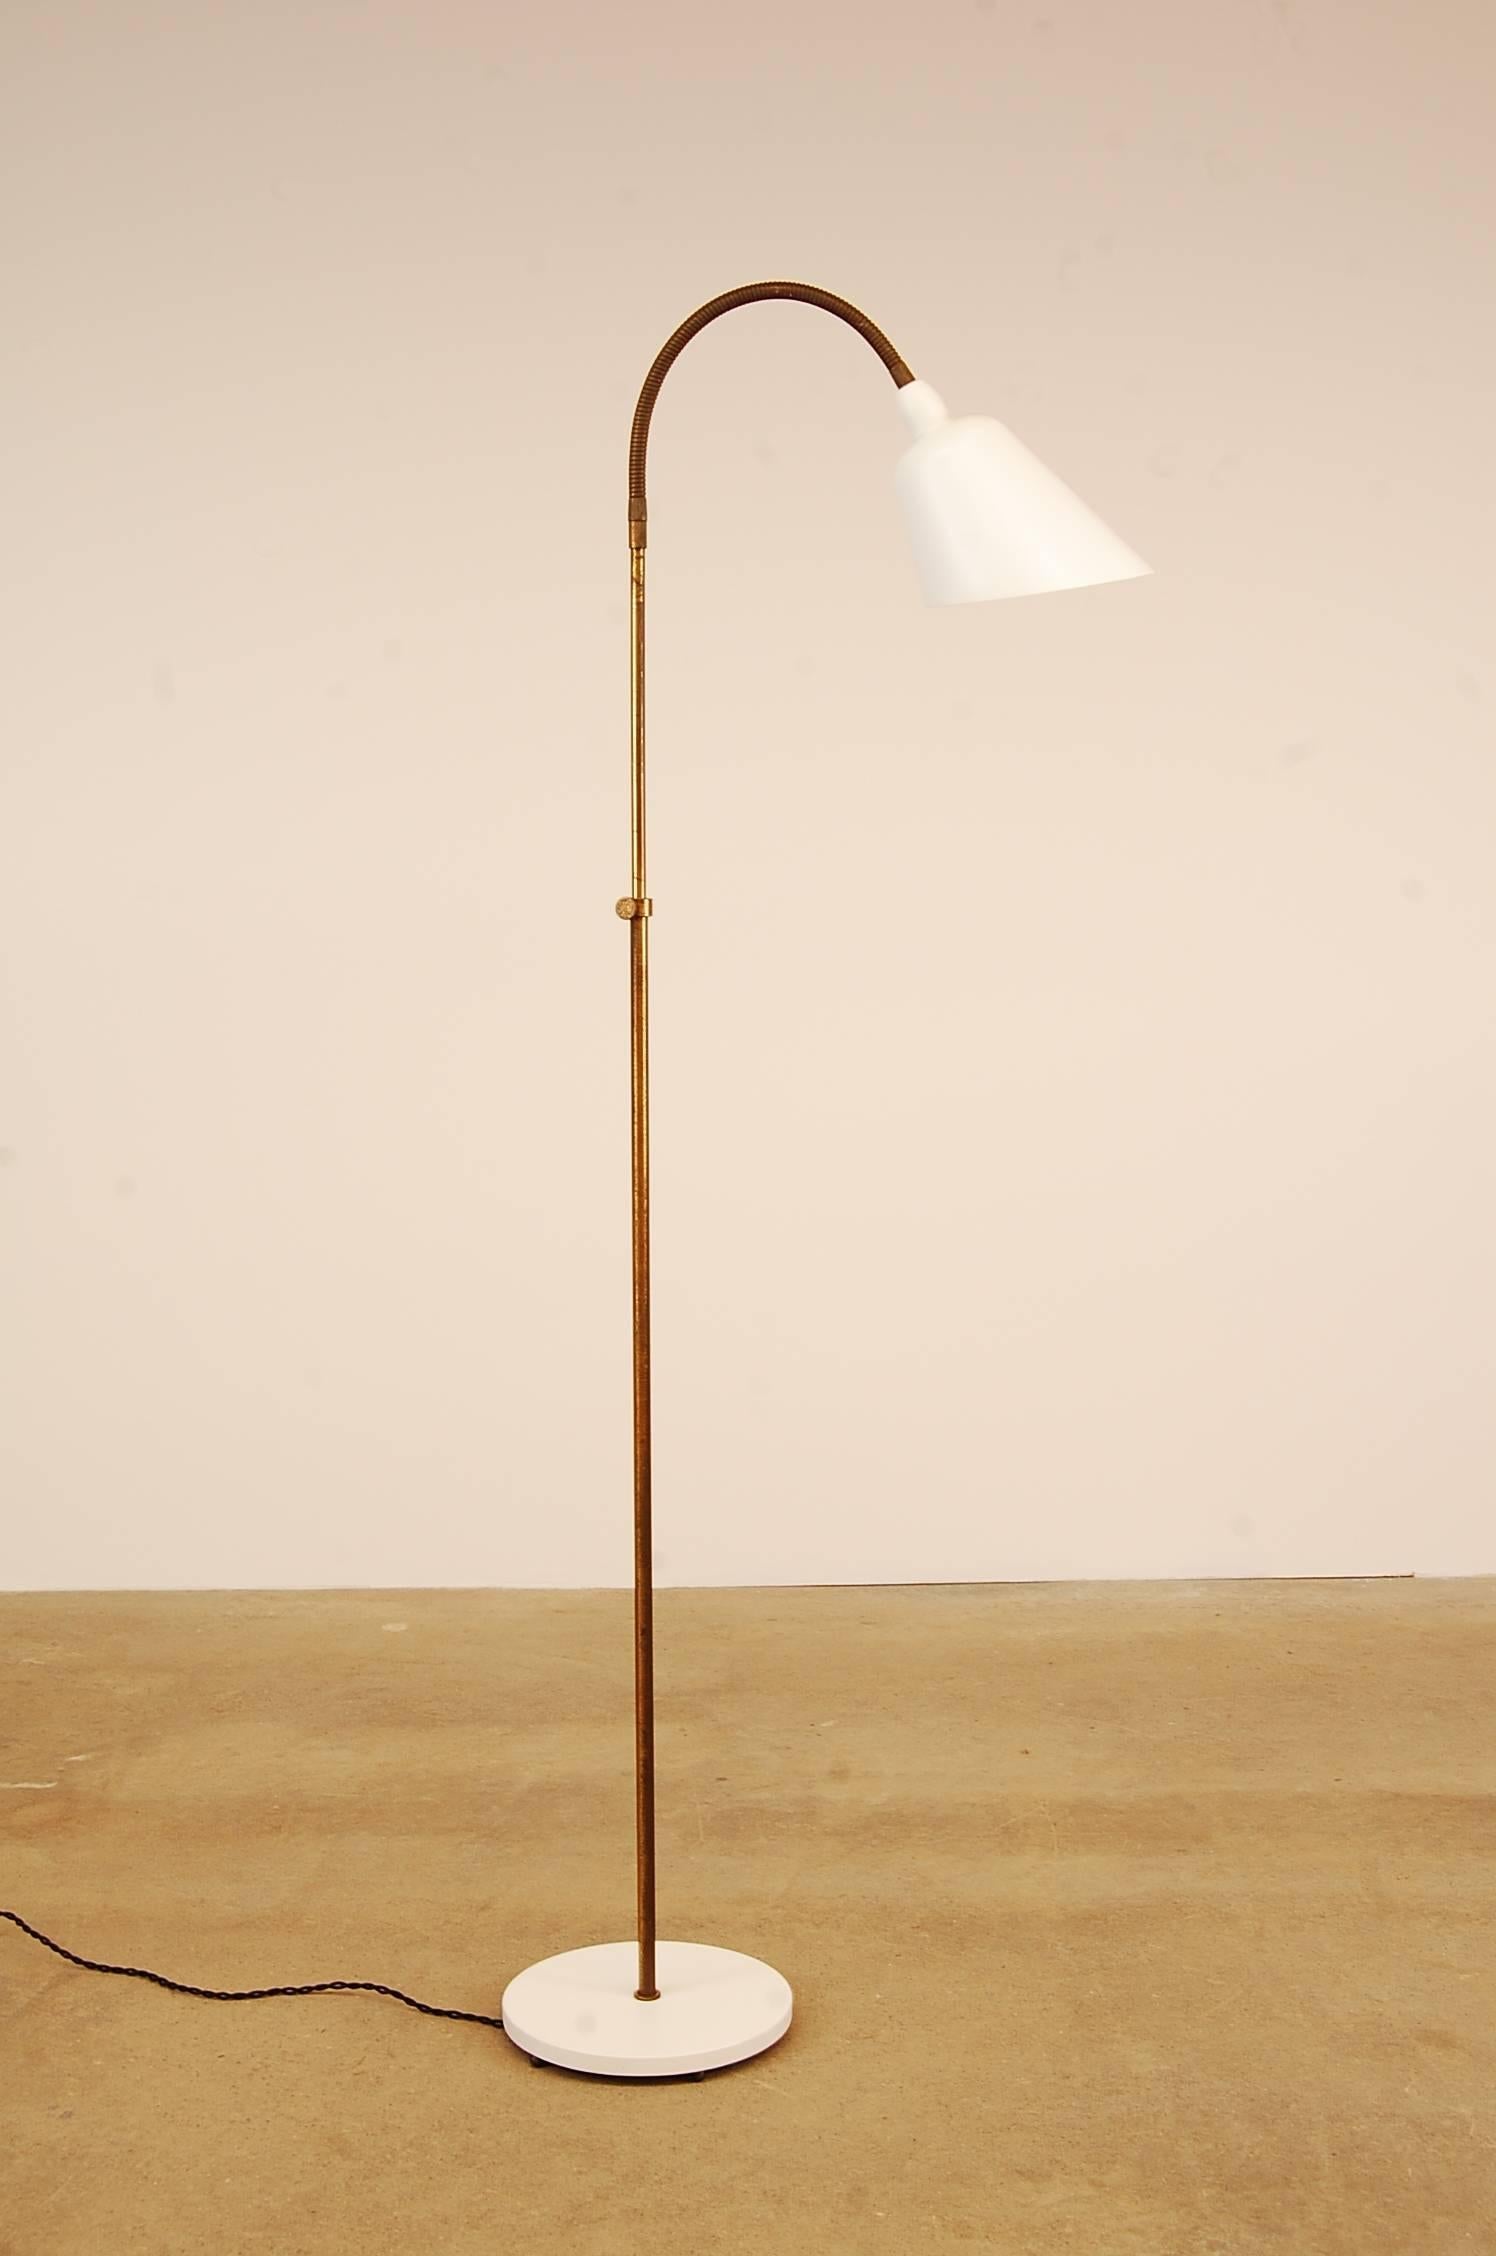 Arne Jacobsen floor lamp, designed circa 1929, and produced by Louis Poulsen in Denmark. Fully restored in a satin white lacquer, and completely rewired. The main shaft is solid brass, and is adjustable to heights roughly 49”-61